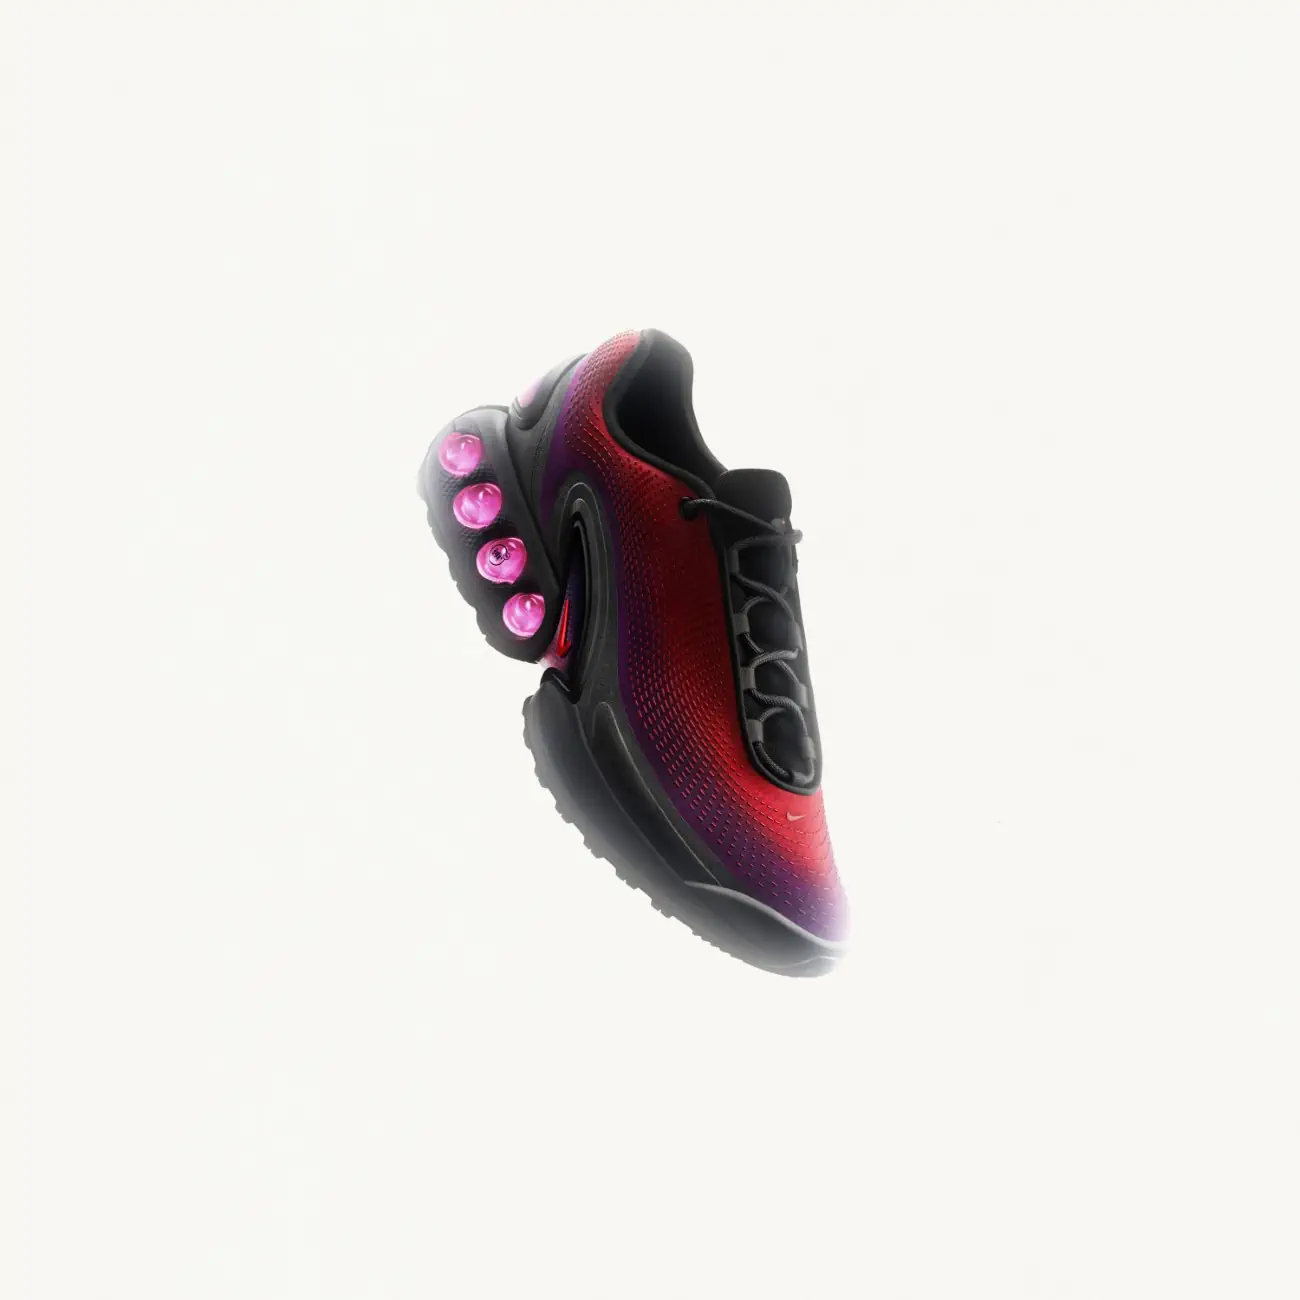 Nike Air Max Dn heralds a new generation of Air